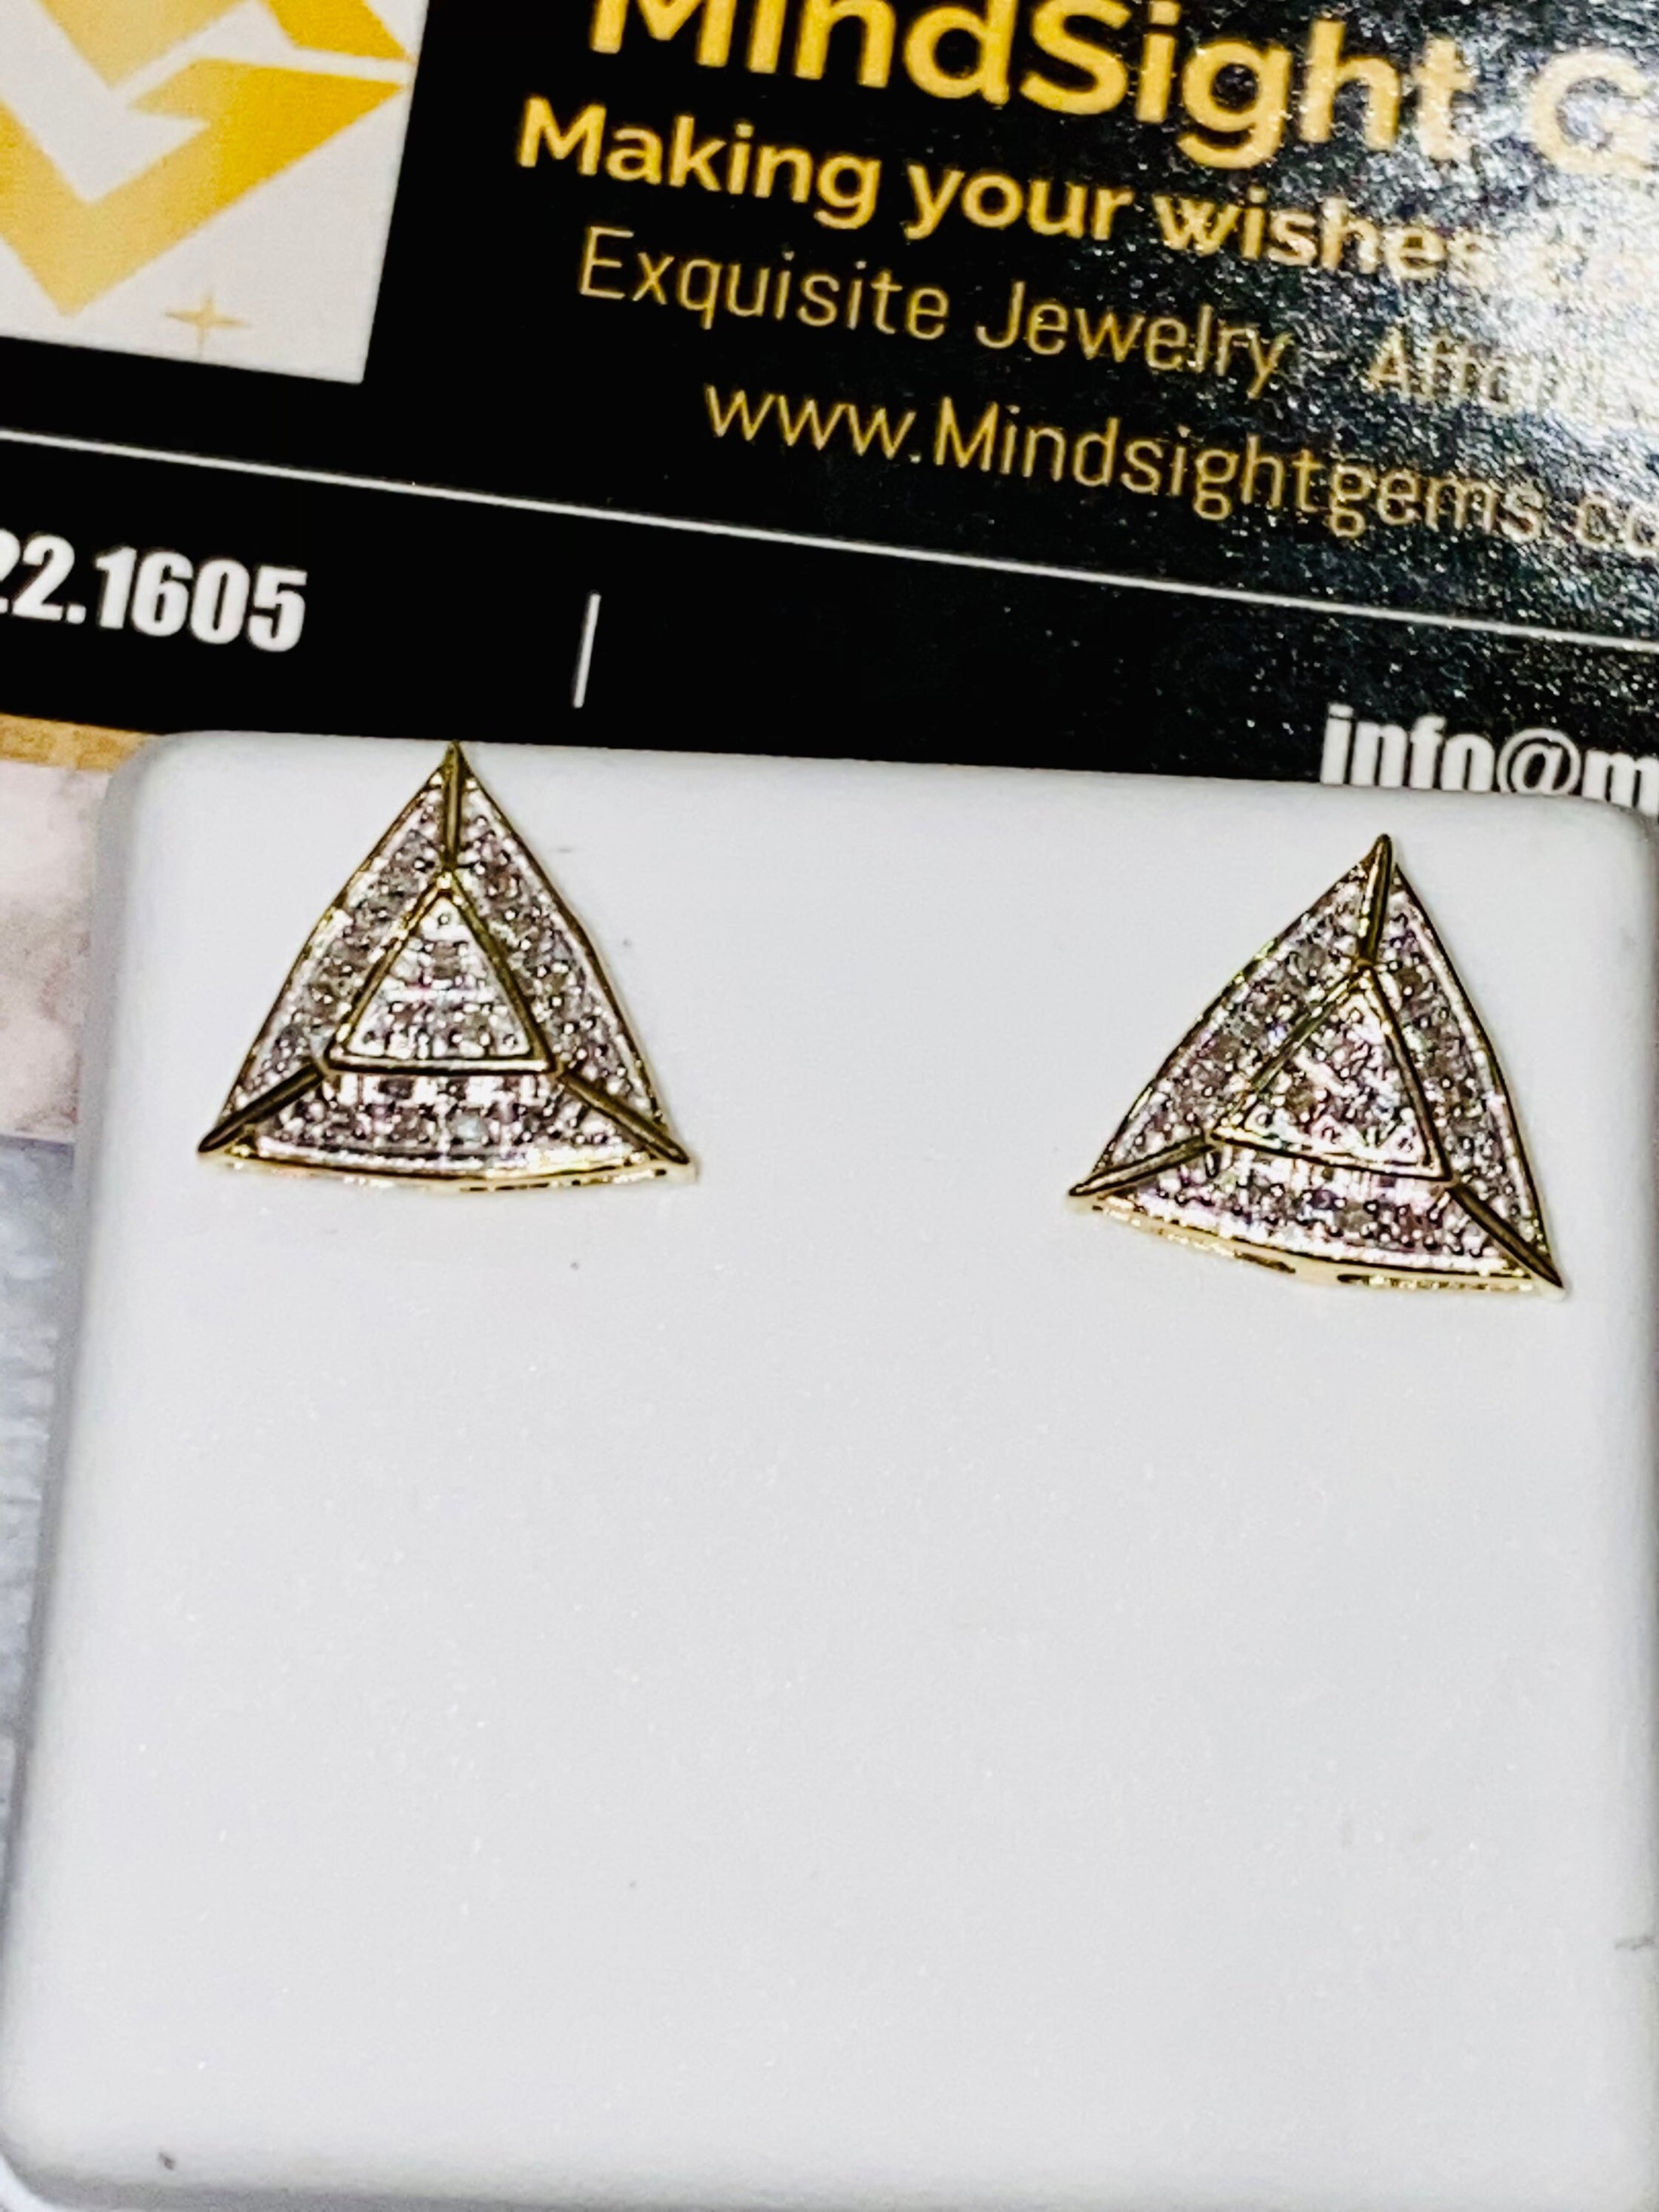 10k solid gold, real diamond earrings, iced out natural diamond hiphop earrings, unisex. Not plated, not lab made, free appraisal, free ship